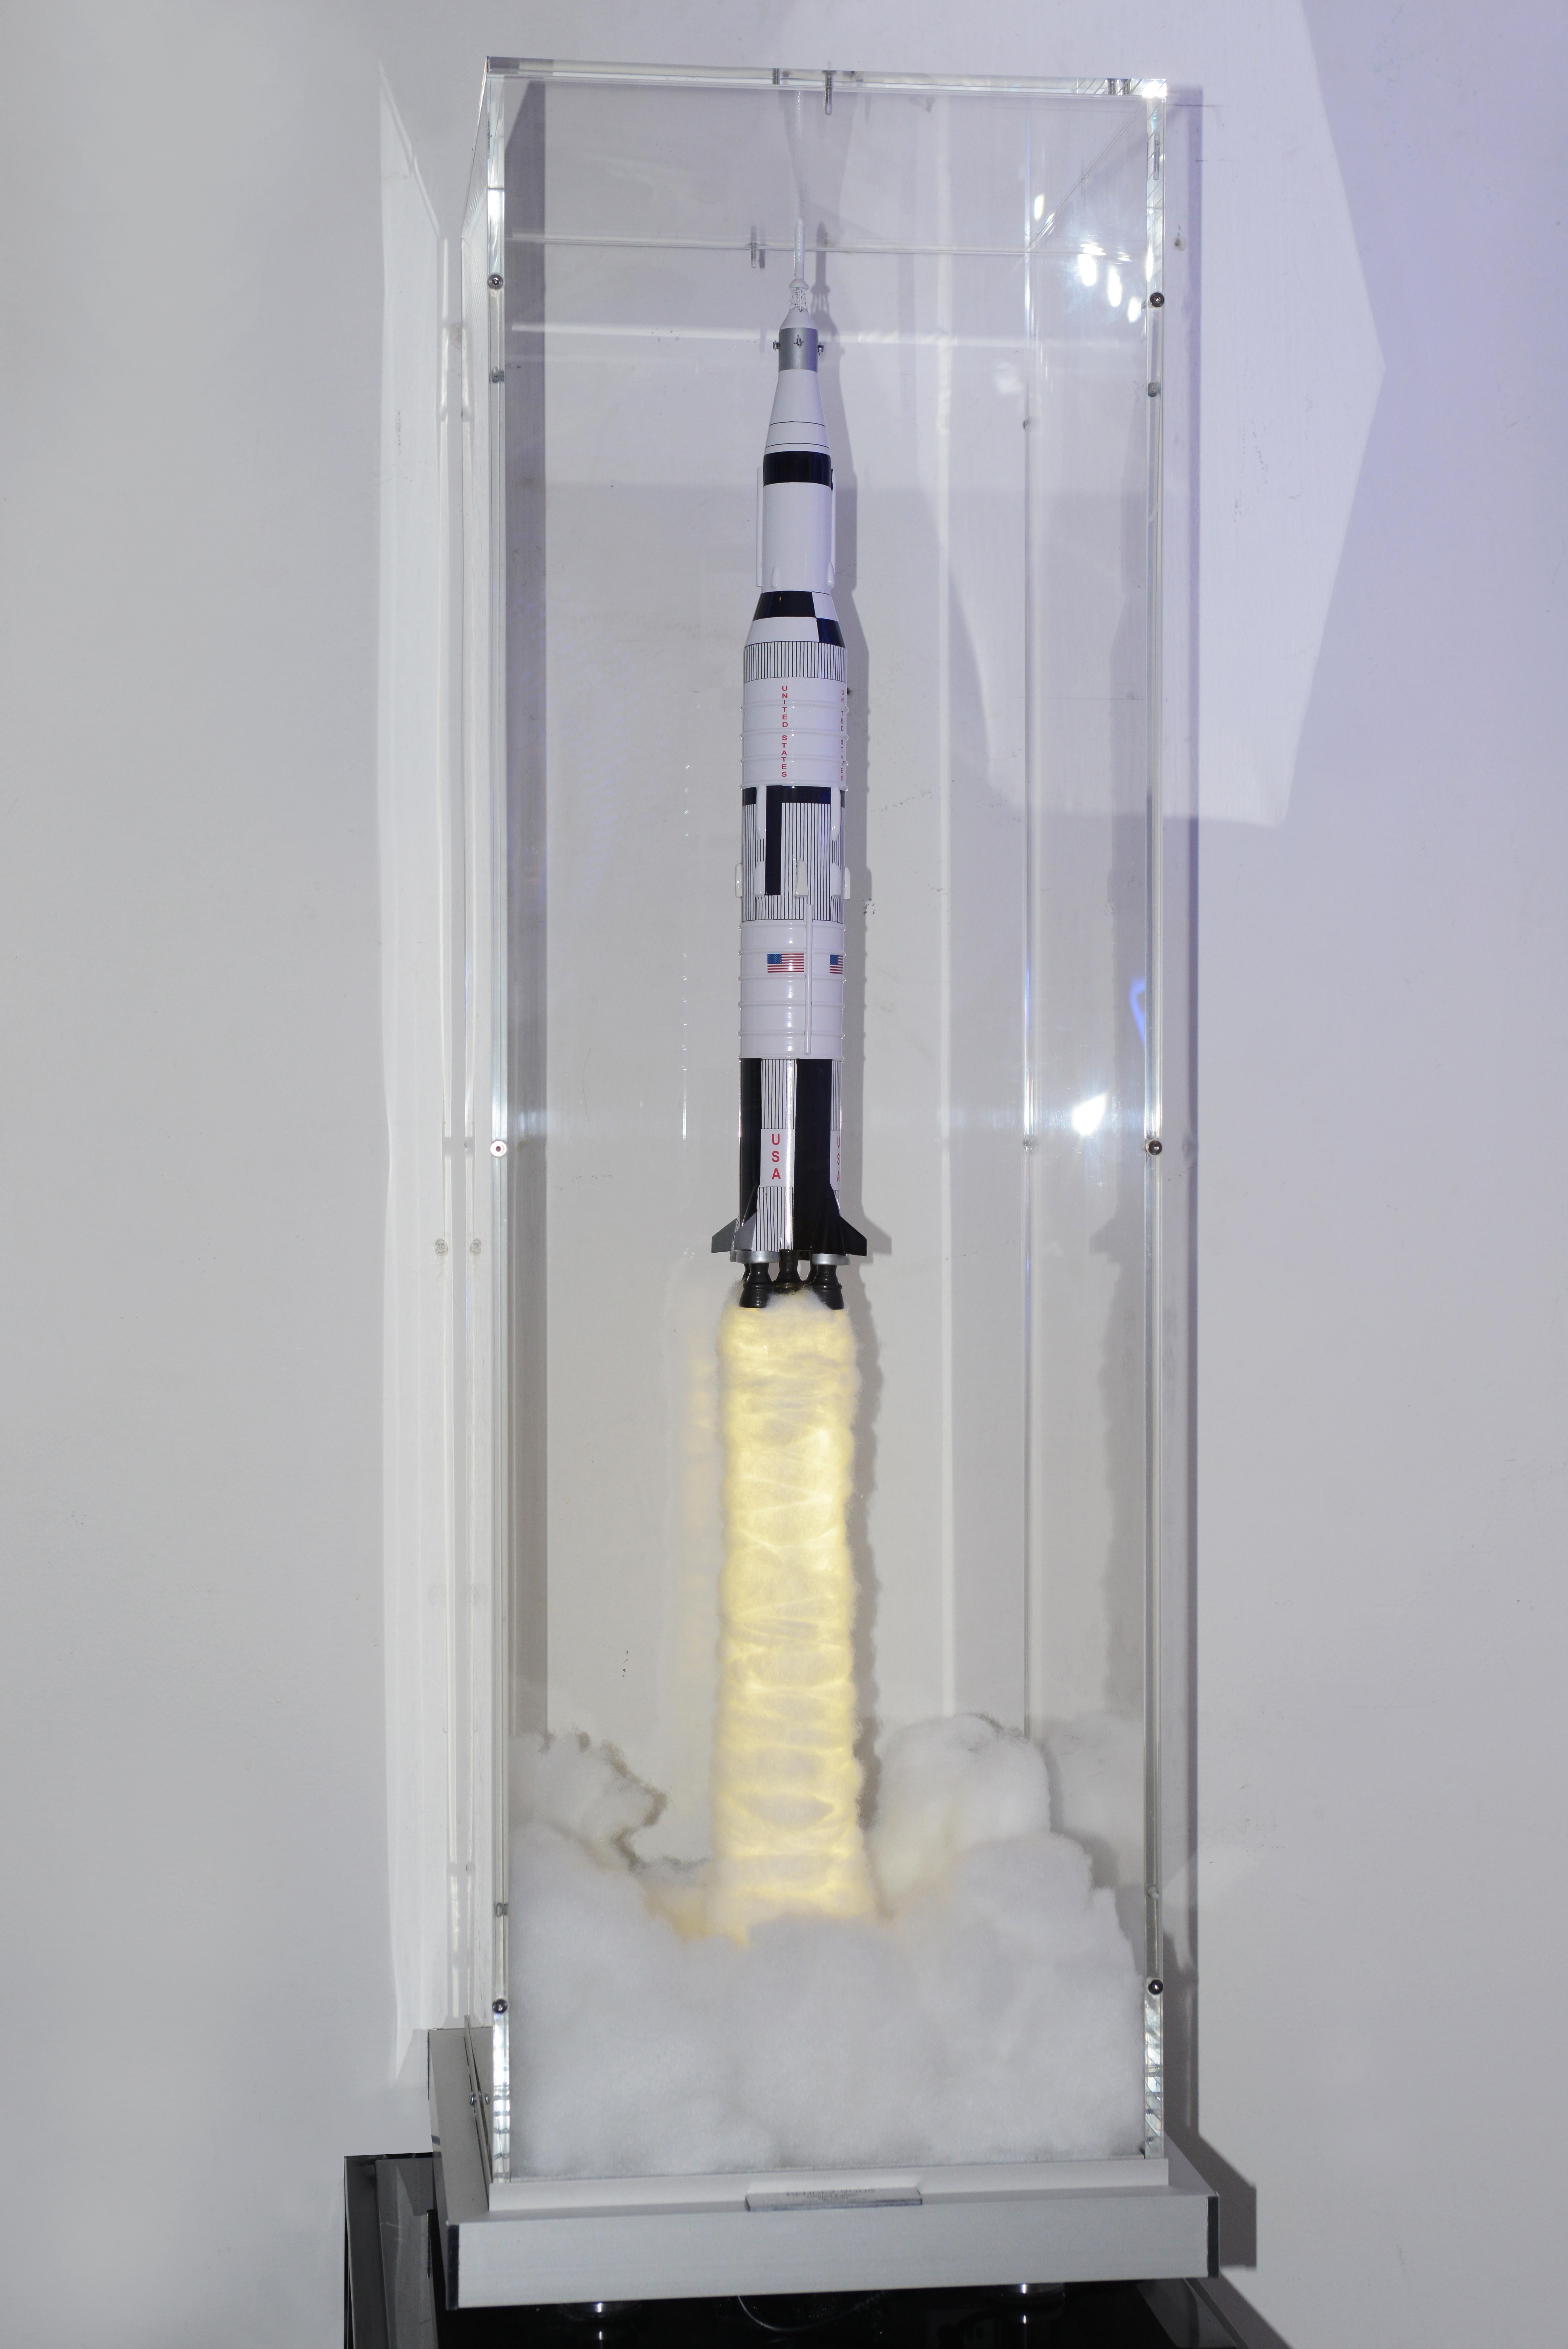 Sculpture Rendez-Vous rocket Saturn V
with wooden structure in varnished finish.
Hand-painted piece. Rocket under
ultra clear plexiglass box, with fume
to create the take-off effect. Smoke 
is lighted with led system. With a remote
controls to